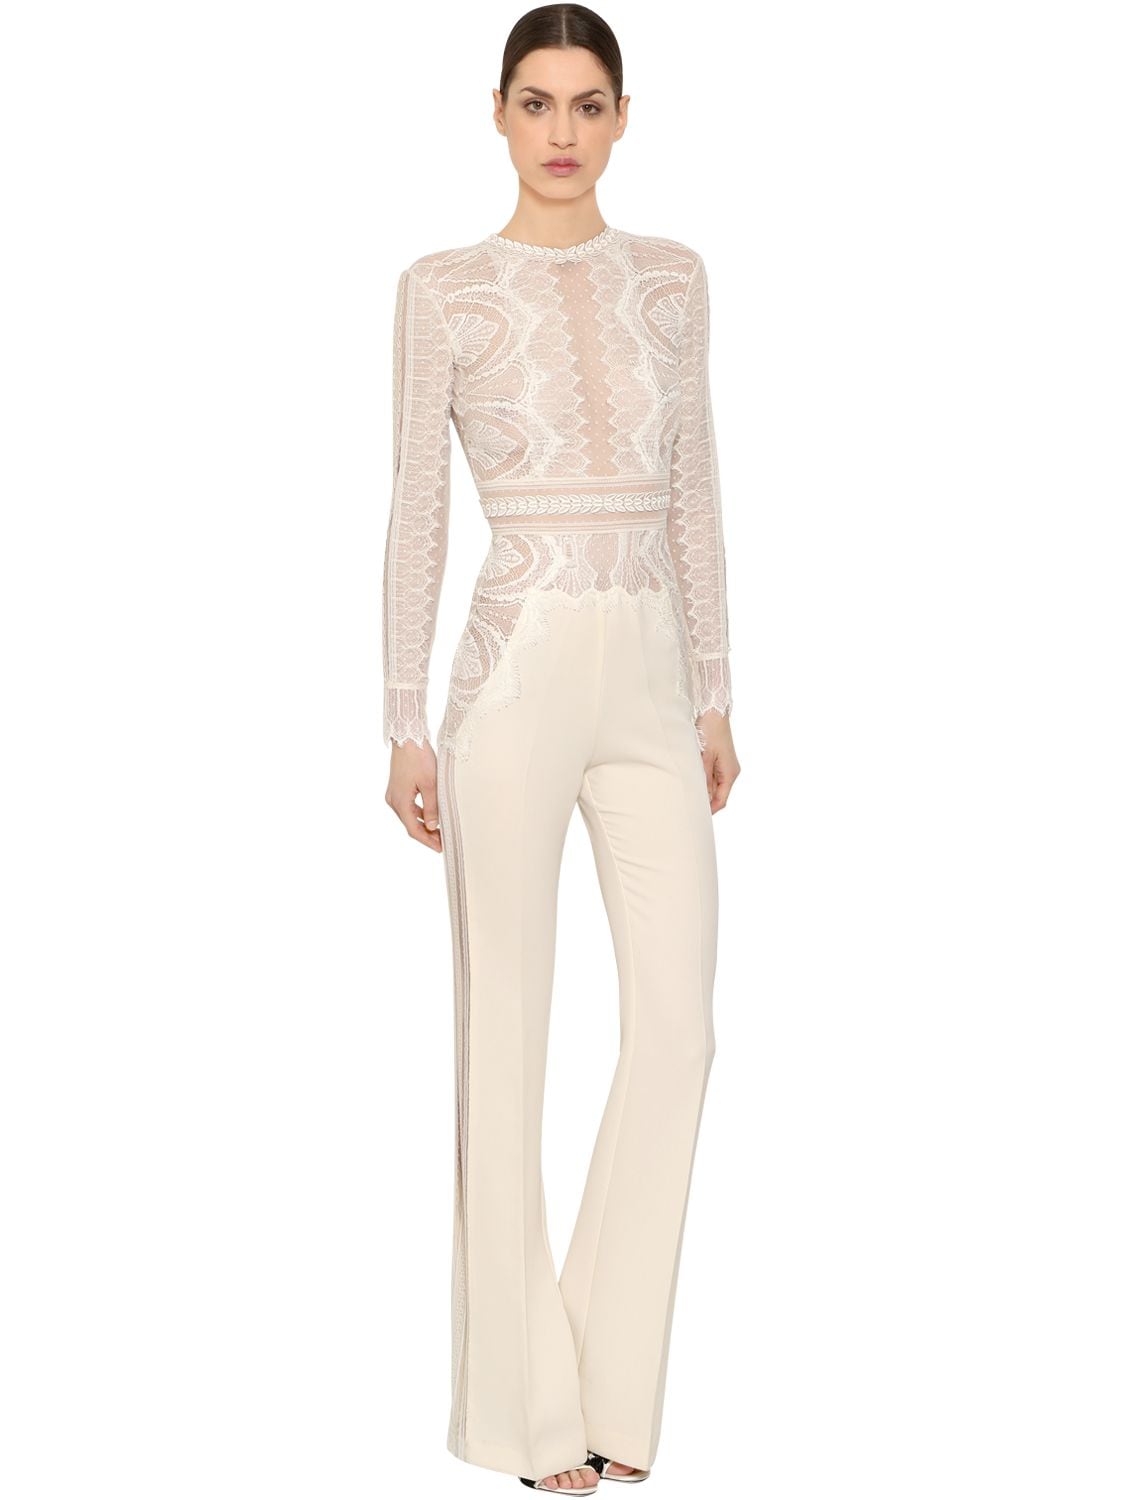 Zuhair Murad Crepe Cady & Lace Jumpsuit In White